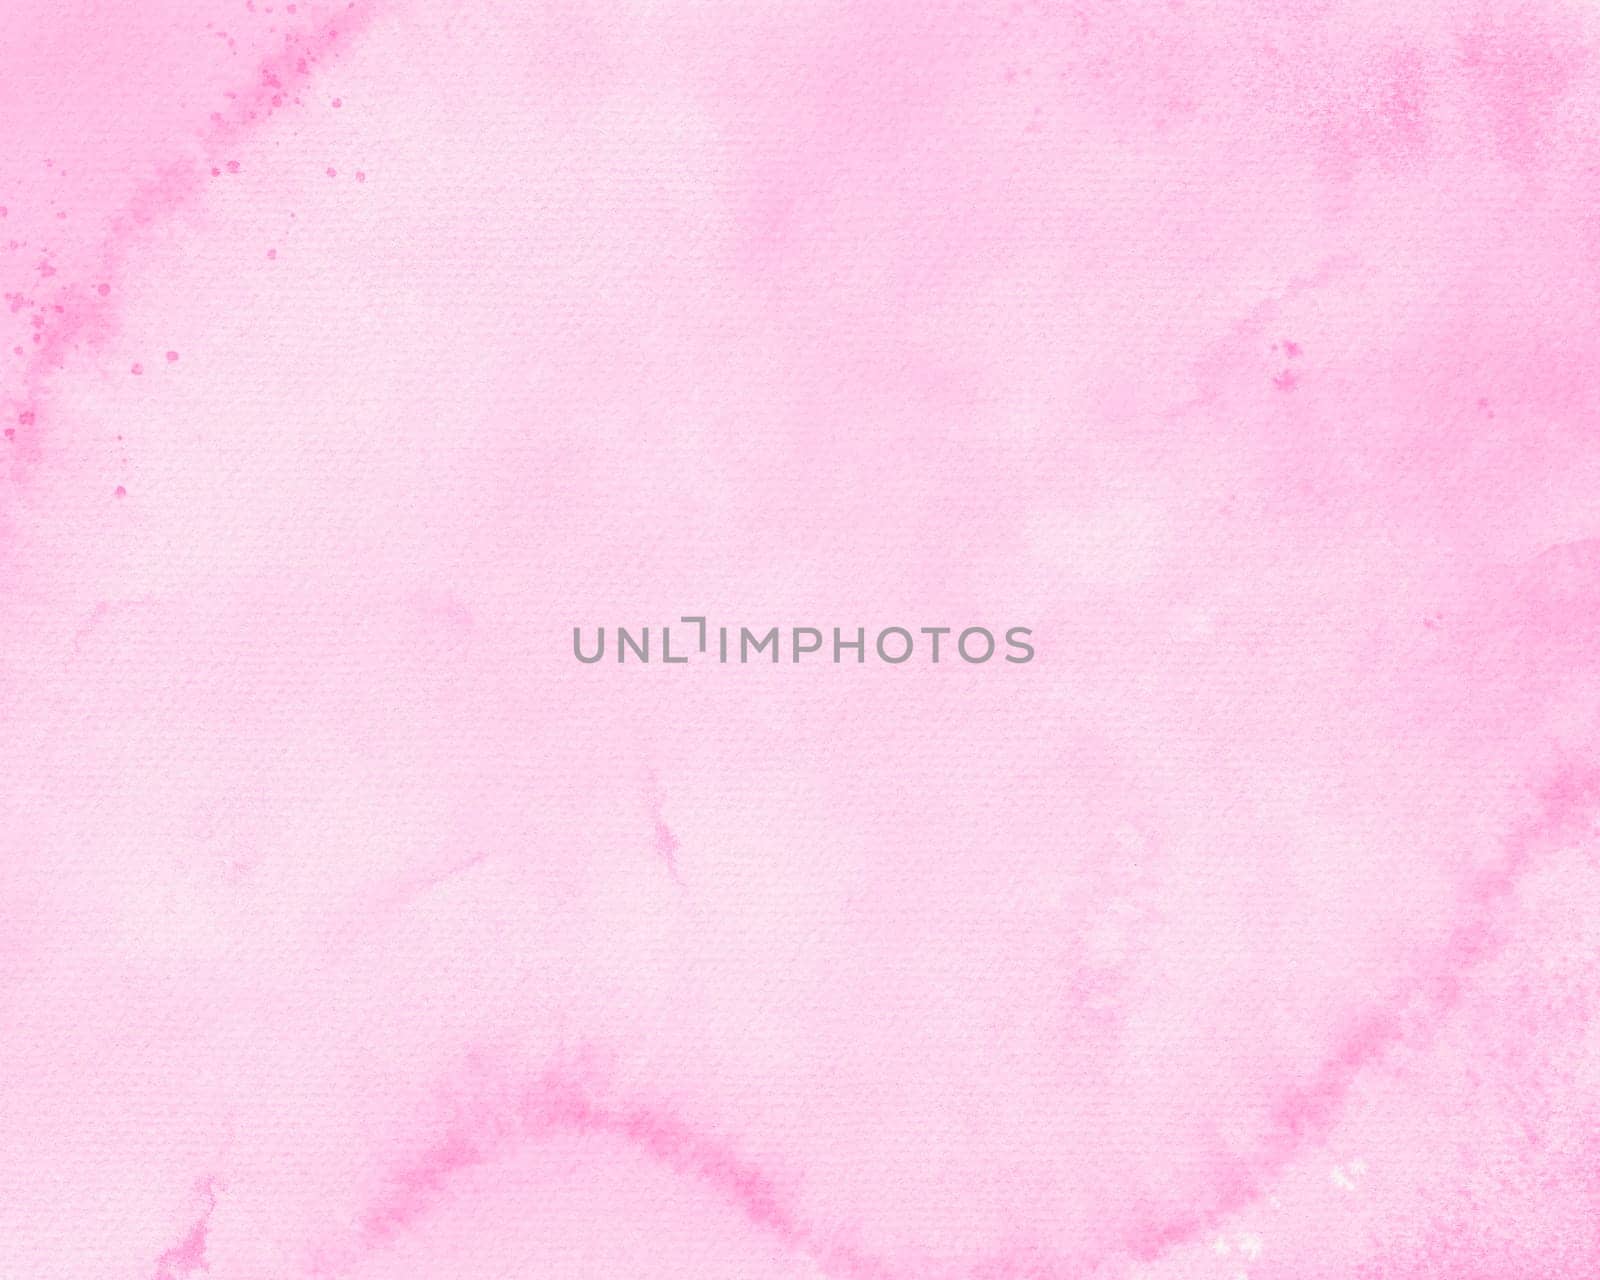 A delicate watercolor background in shades of pink. Soft water droplets and subtle streaks create a dreamy and ethereal atmosphere. Perfect for invitations, greeting cards, posters, and more.